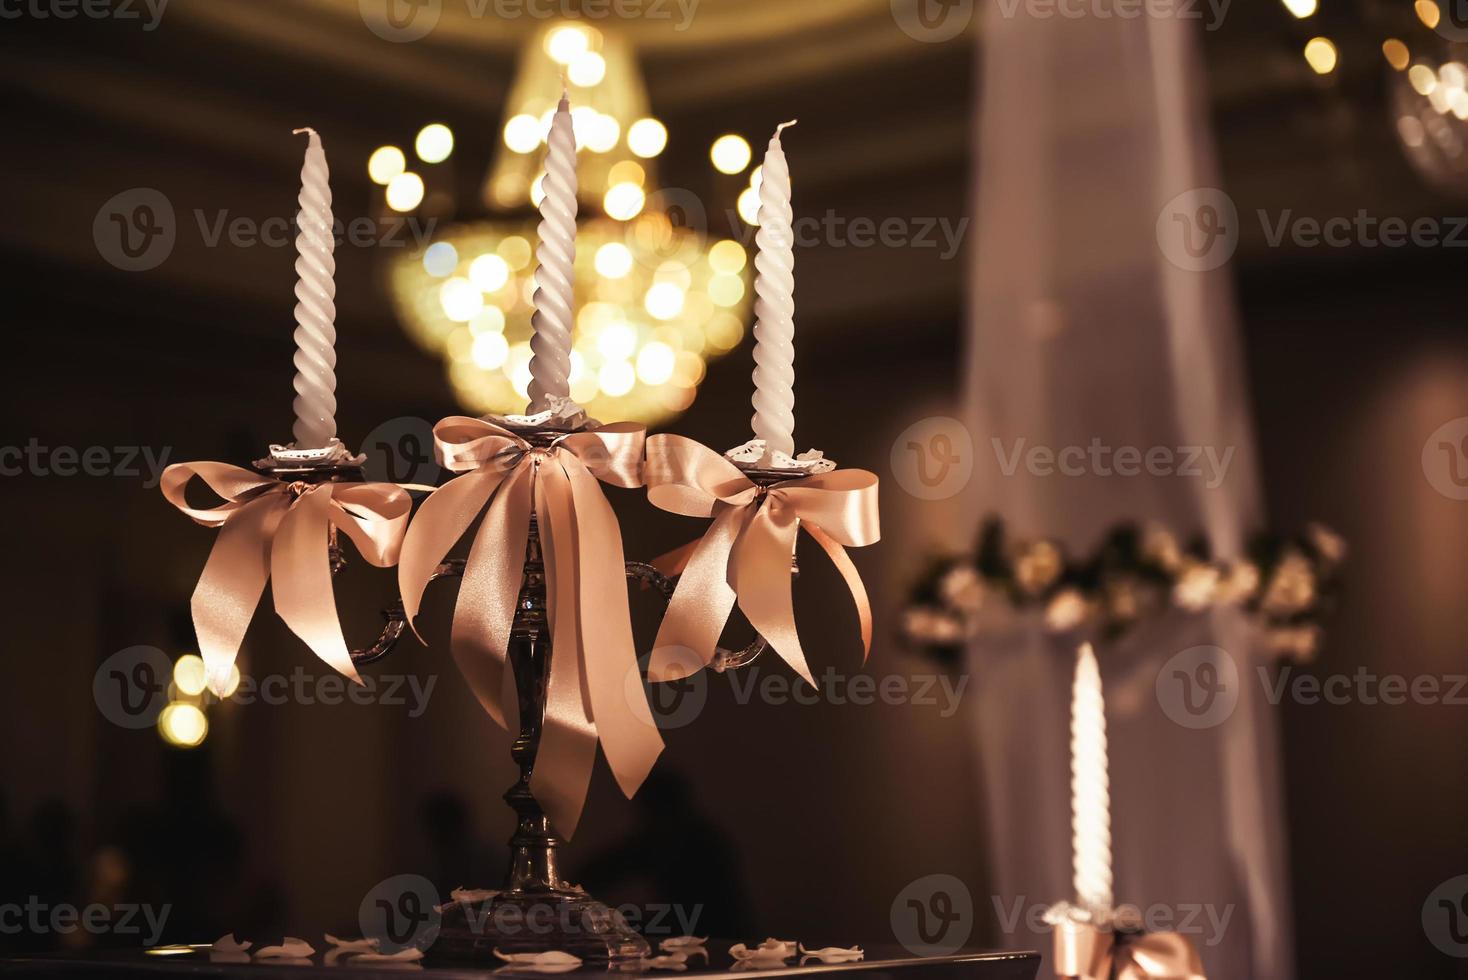 candlesticks with candles in ballroom photo